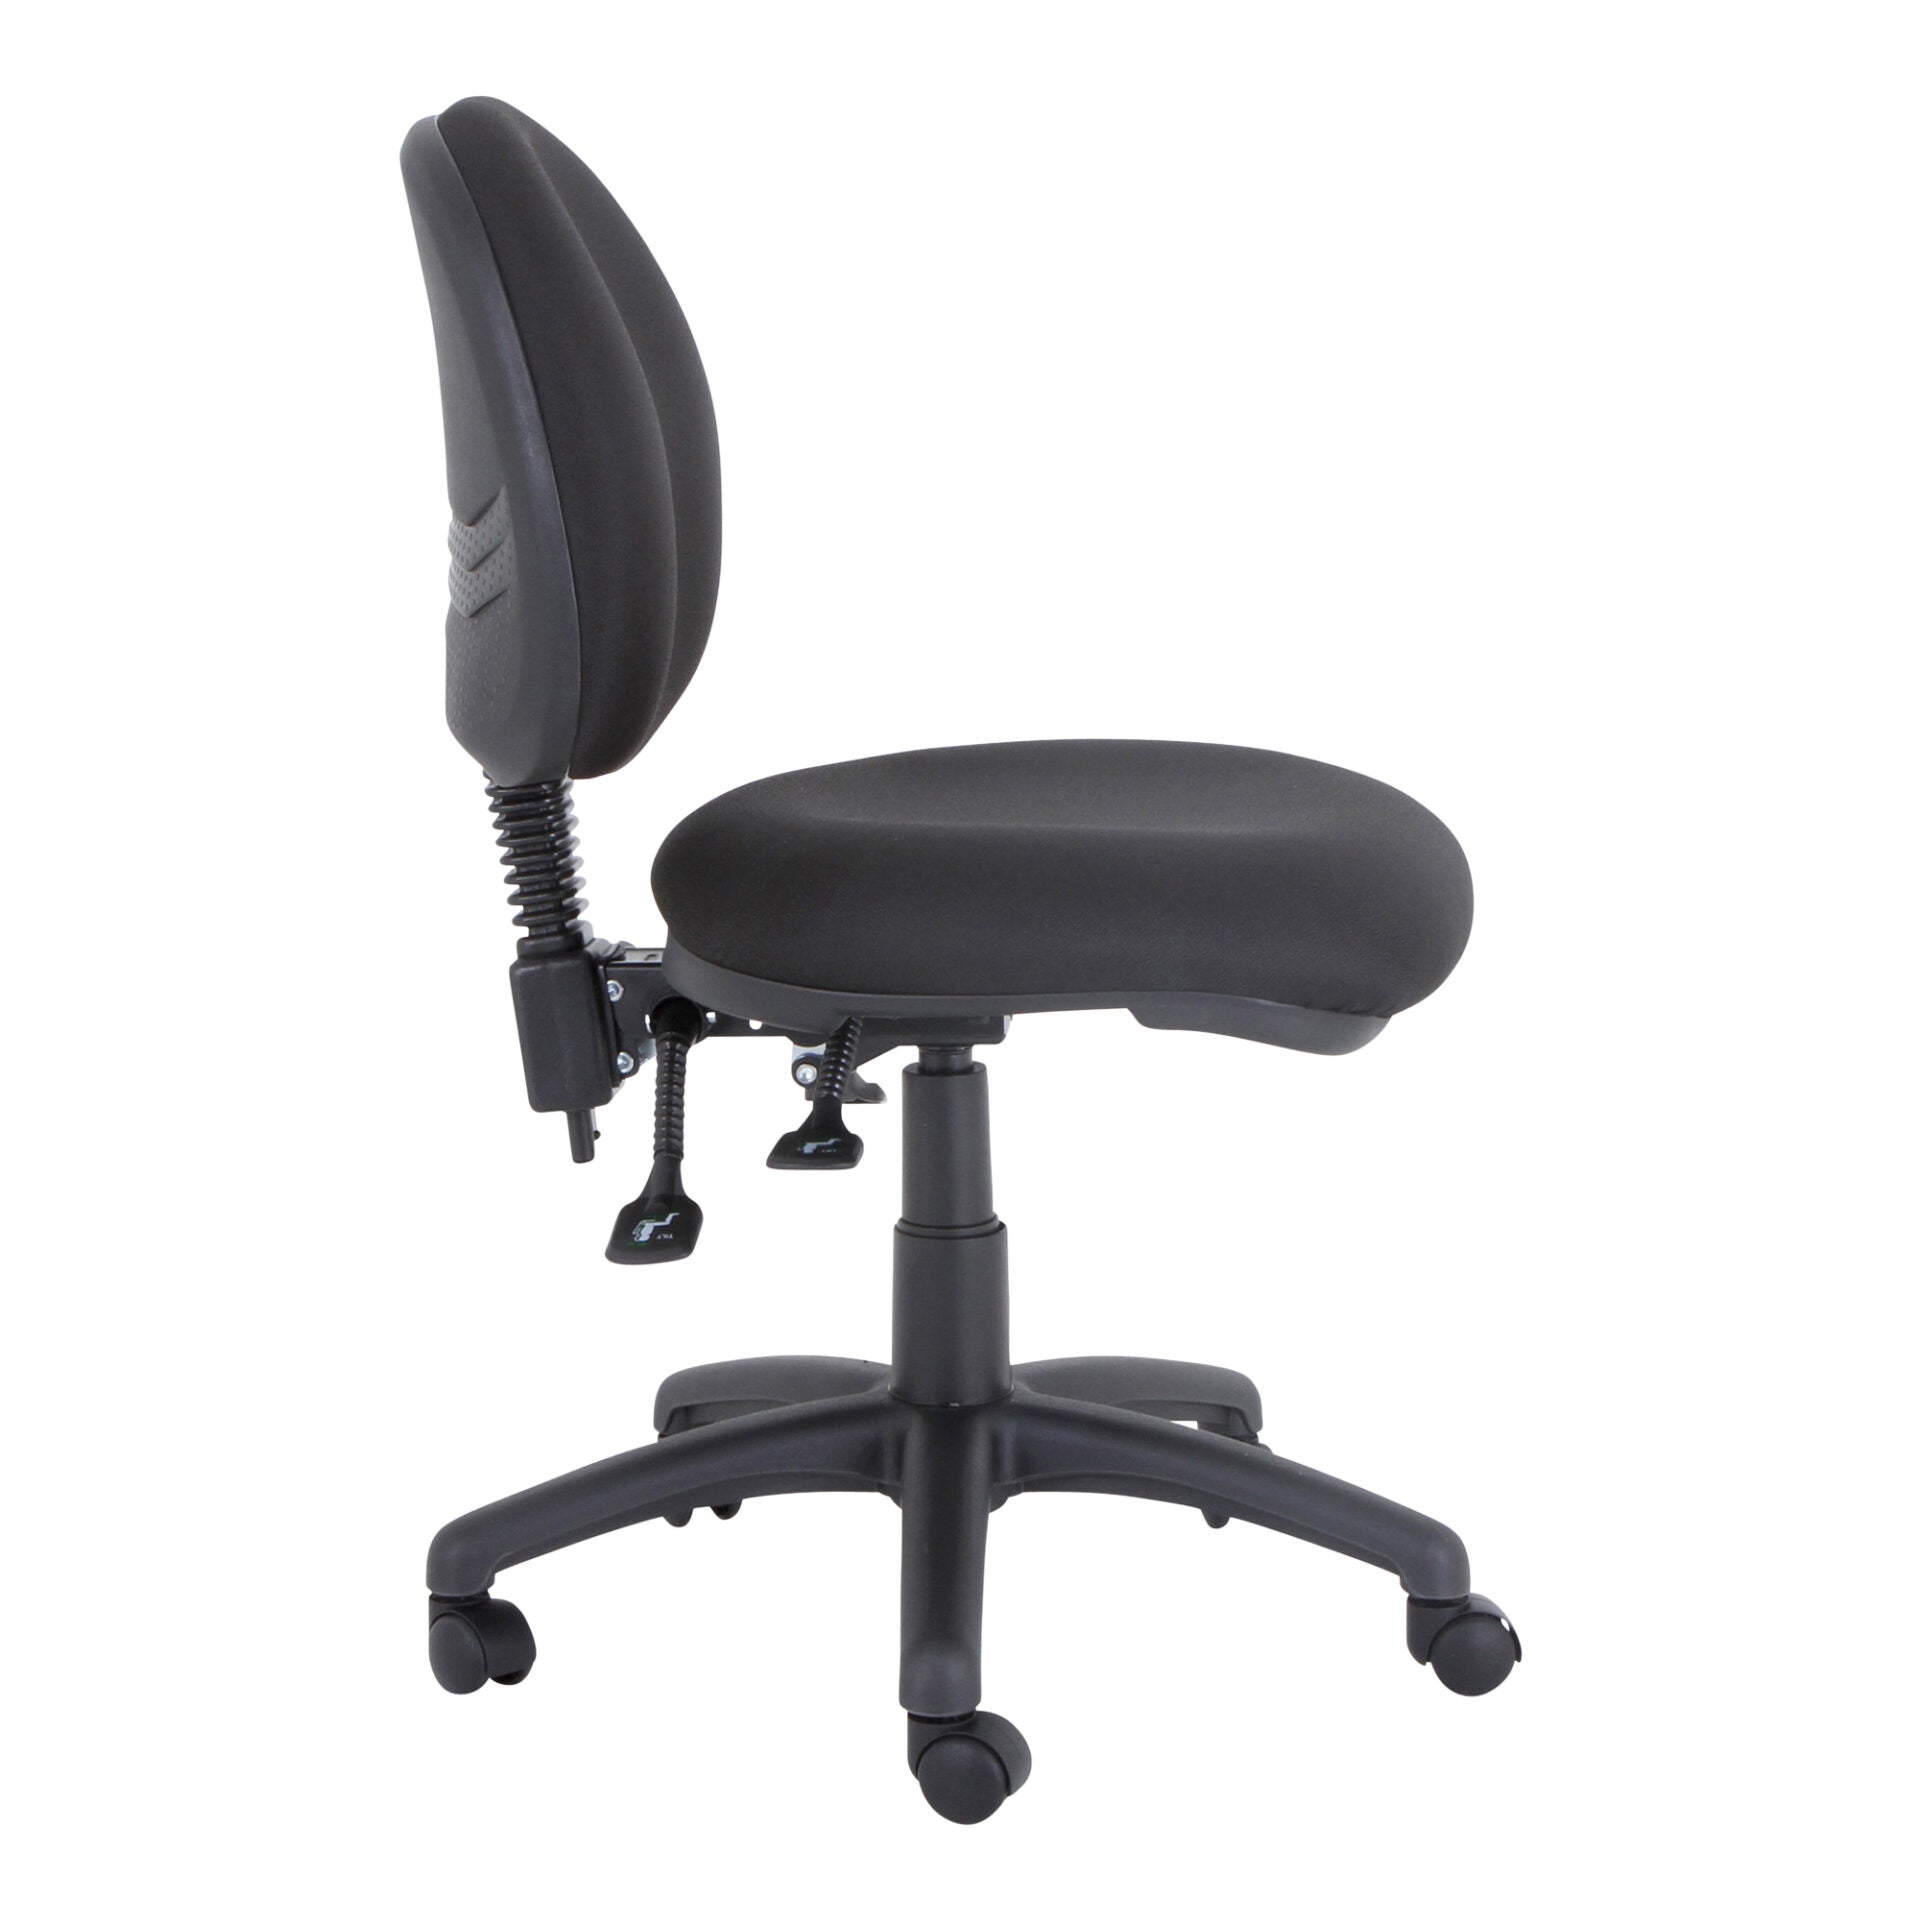 Mondo Java mid-back task chair in black, side view.